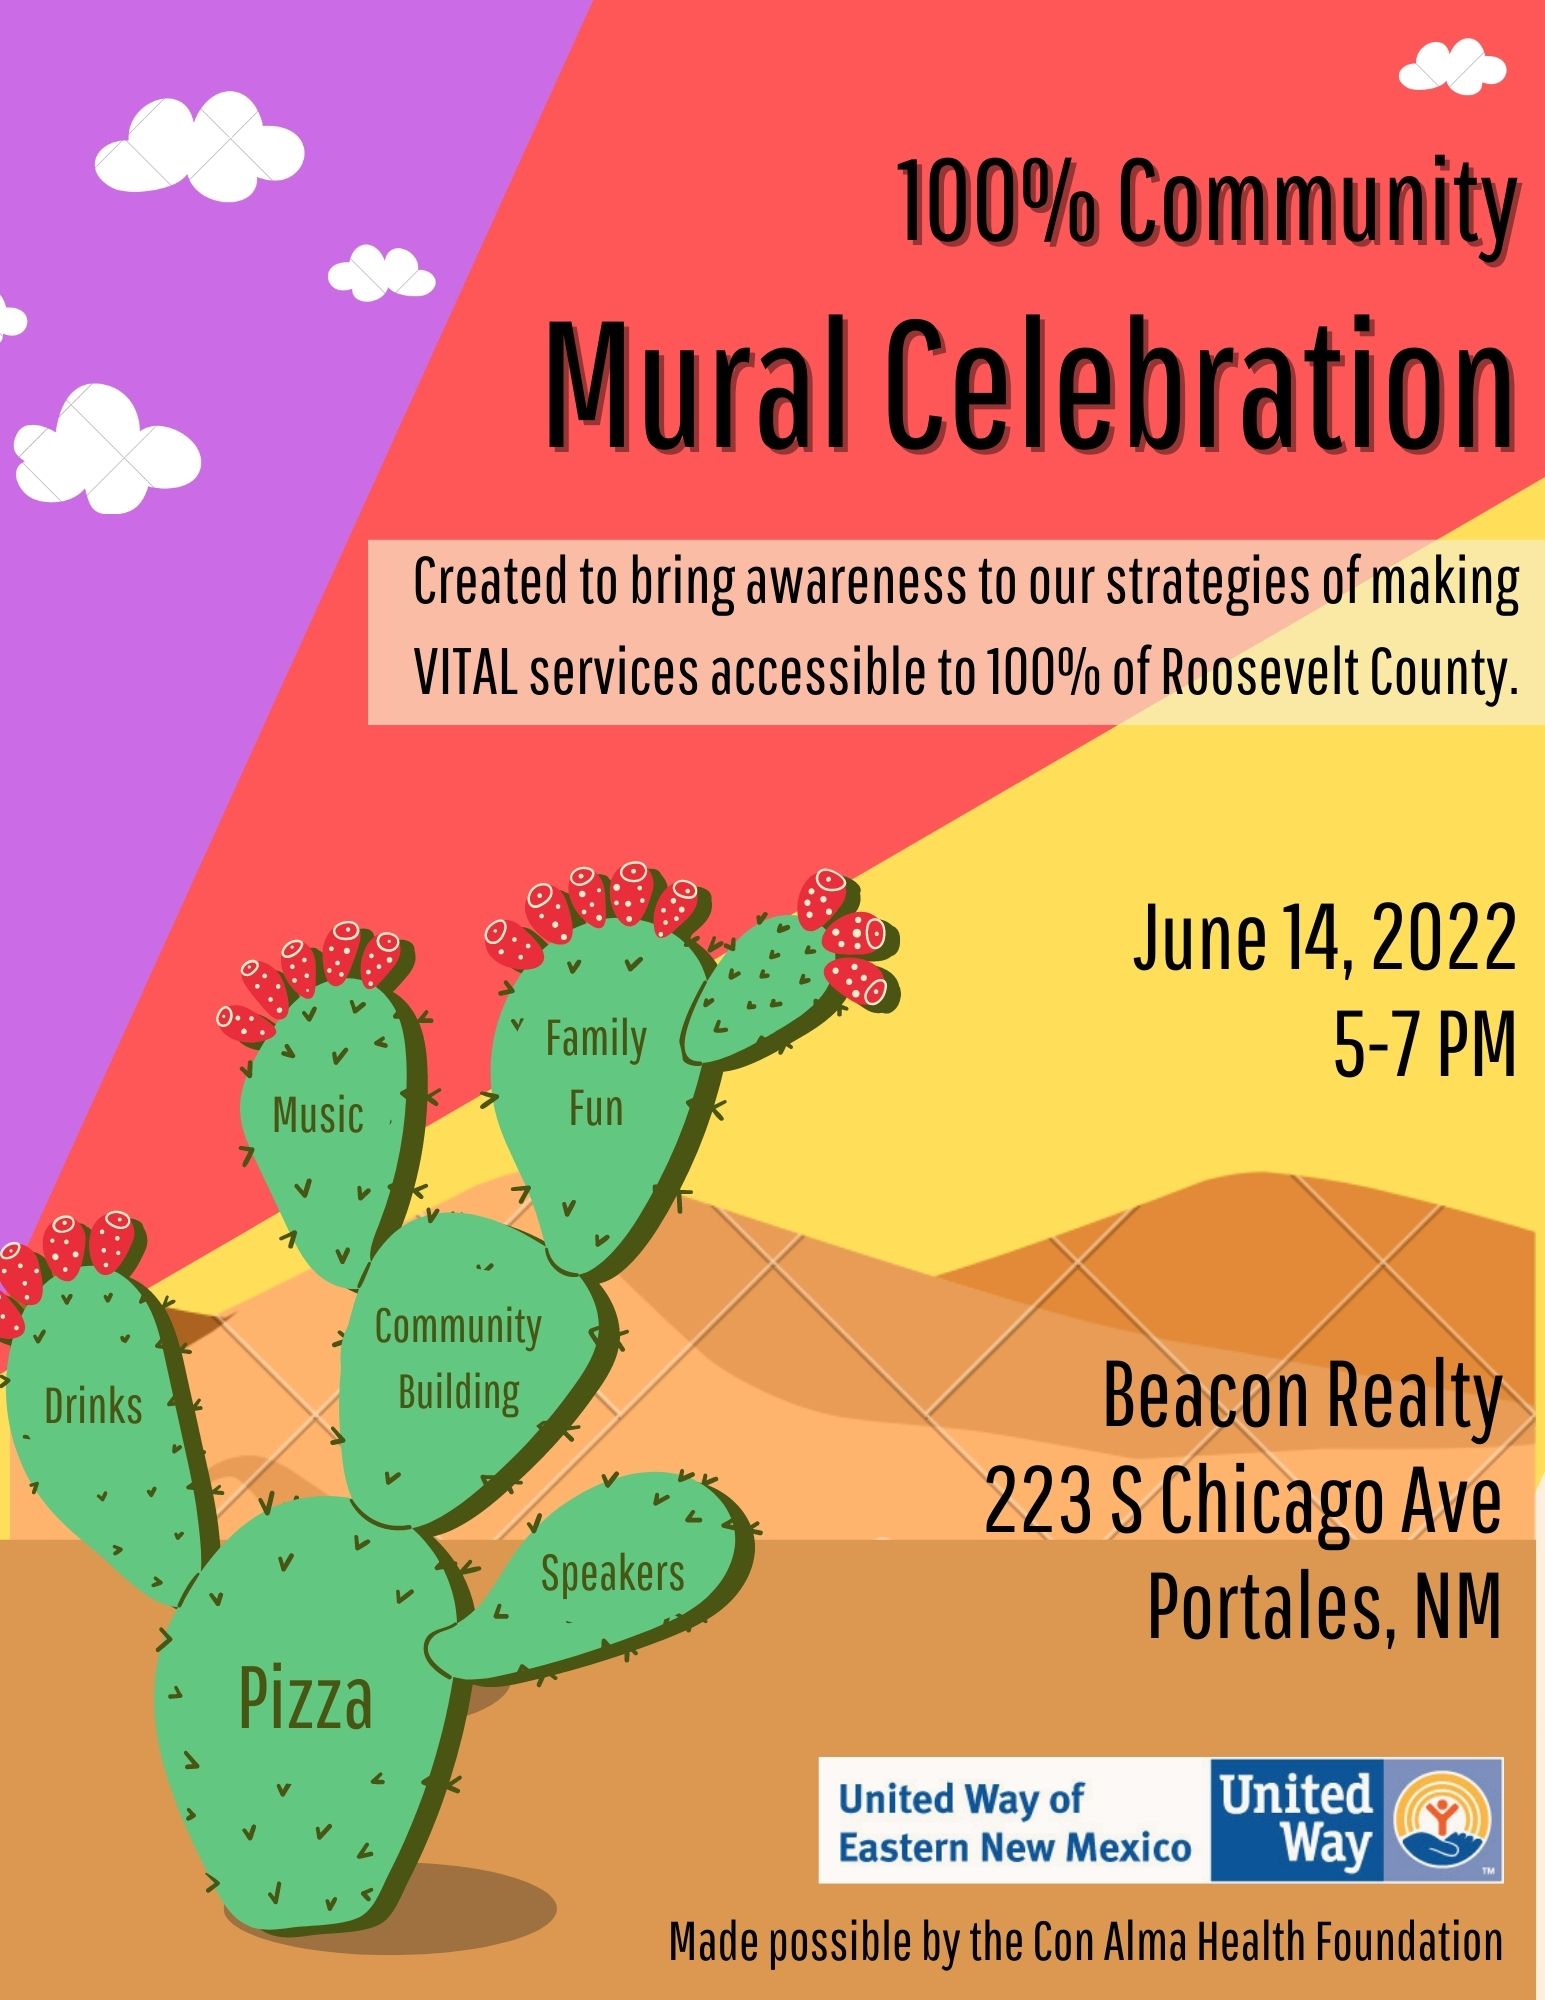 invitation to mural celebration Jun 14 from 5-7p at 223 Chicago Street-Portales